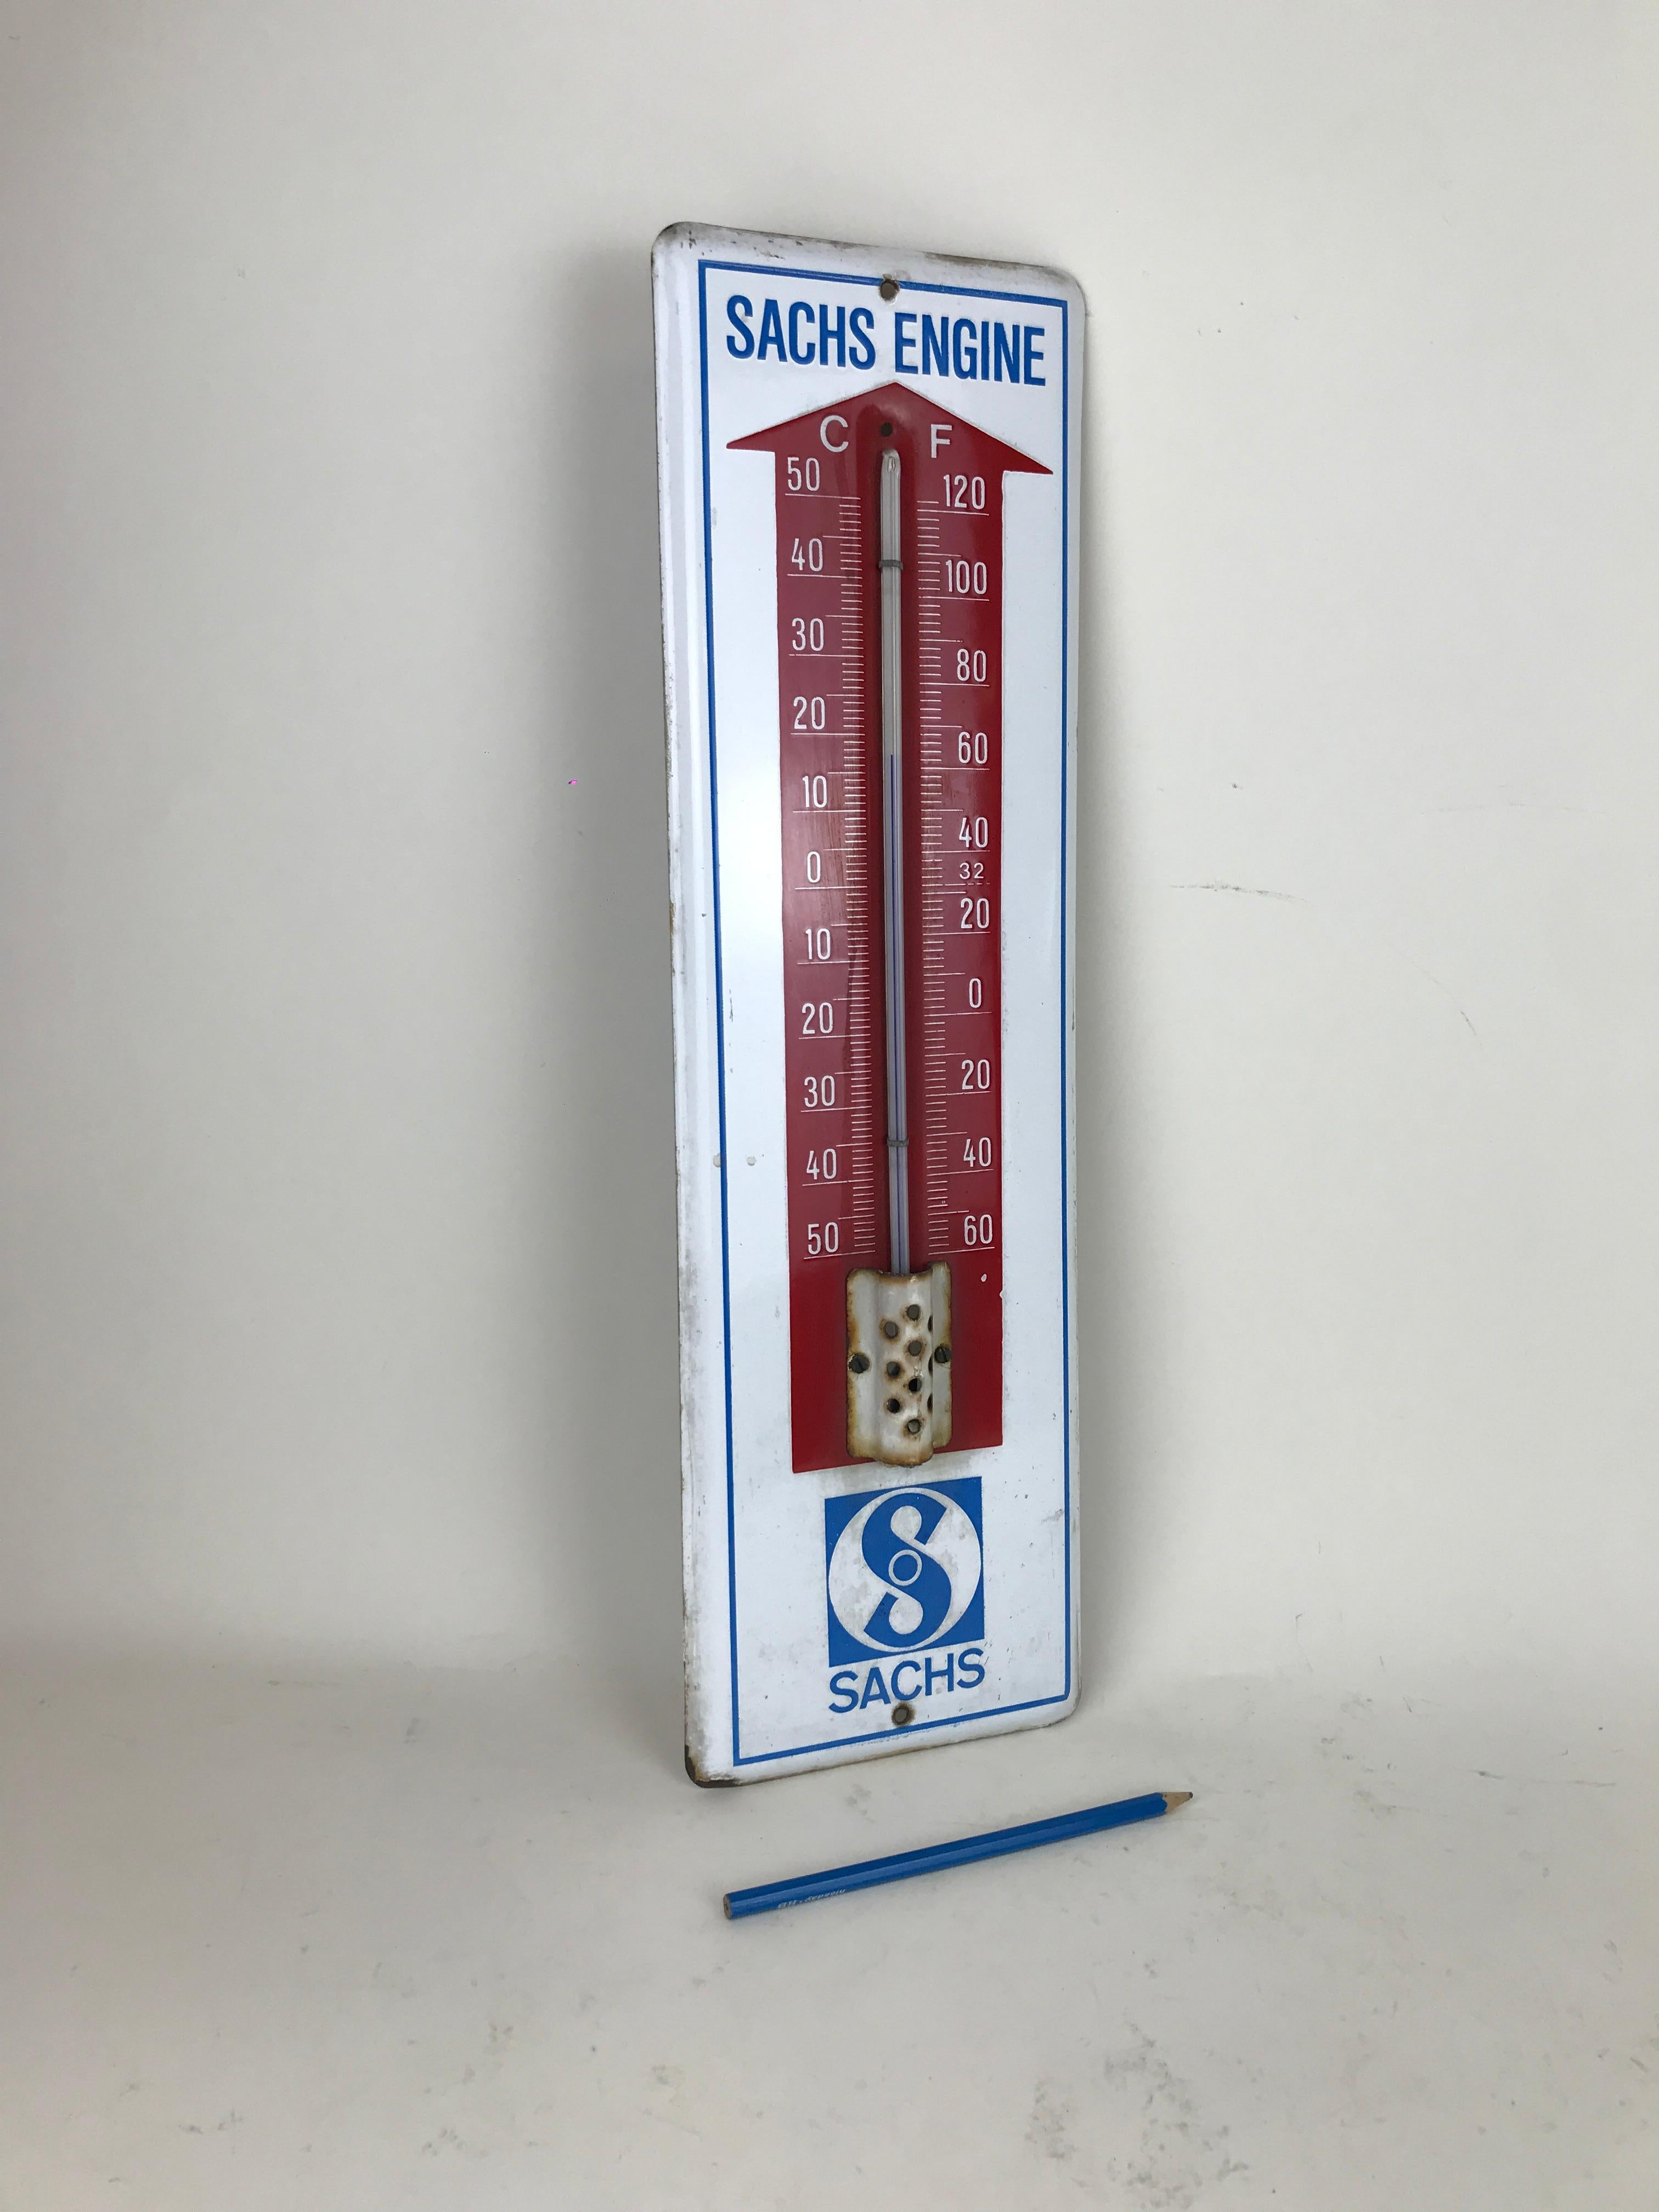 Vintage advertising enamel metal wall thermometer by Sachs Engine made in Germany in the 1950s, in white, red and blue color.

The thermometer is working showing temperature both in Celsius degrees and Fahrenheit.


Collector's note:

ZF